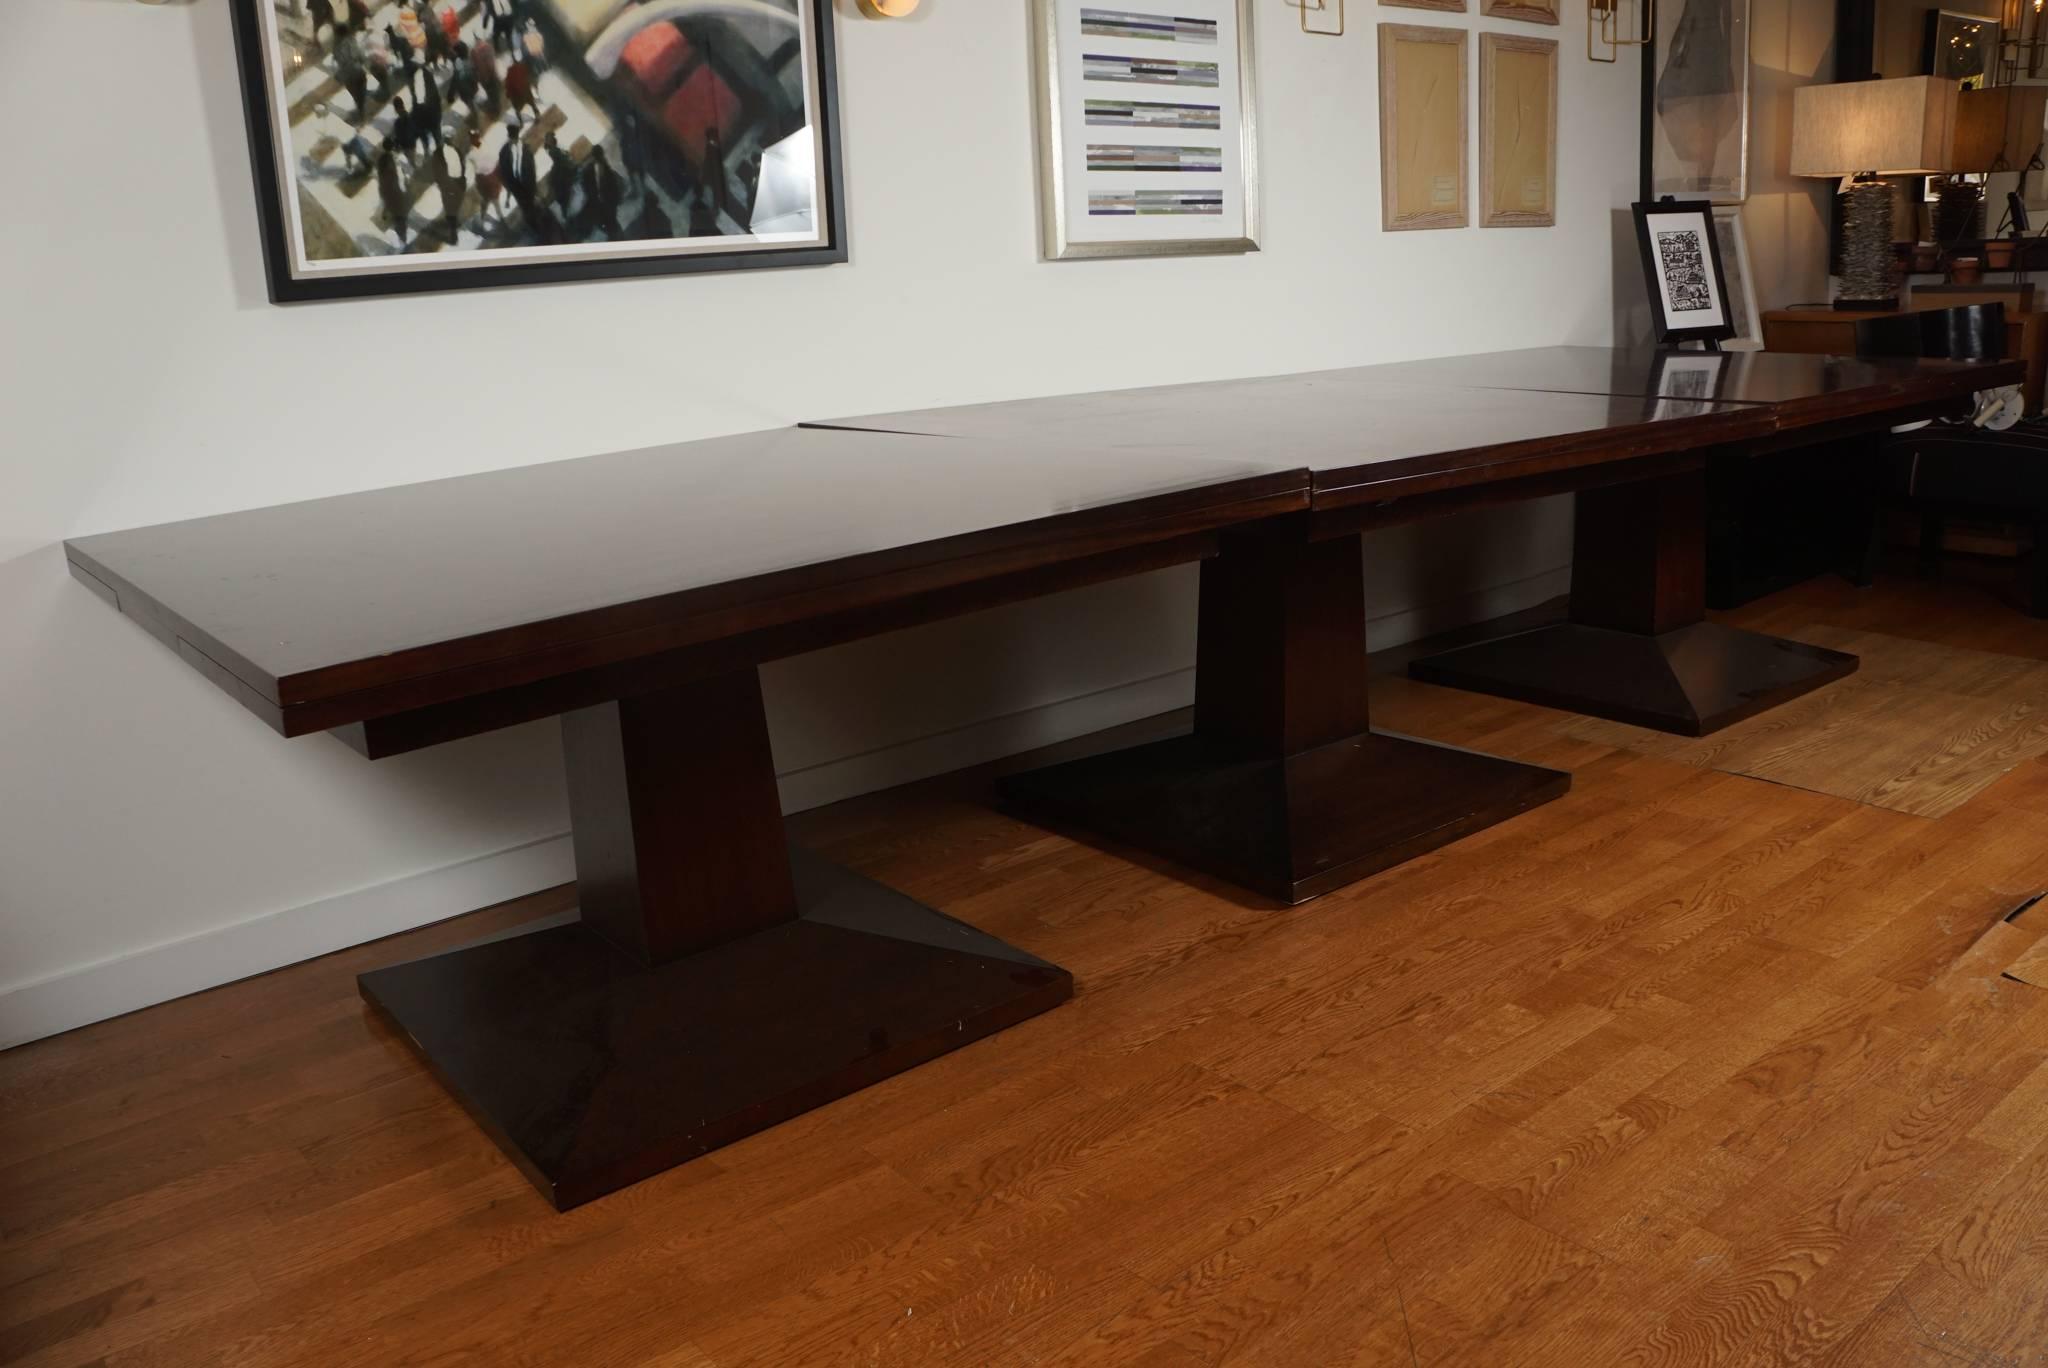 Large, three-part mahogany veneer, dining table.
The table consists of three, individual pedestal tables, each 52